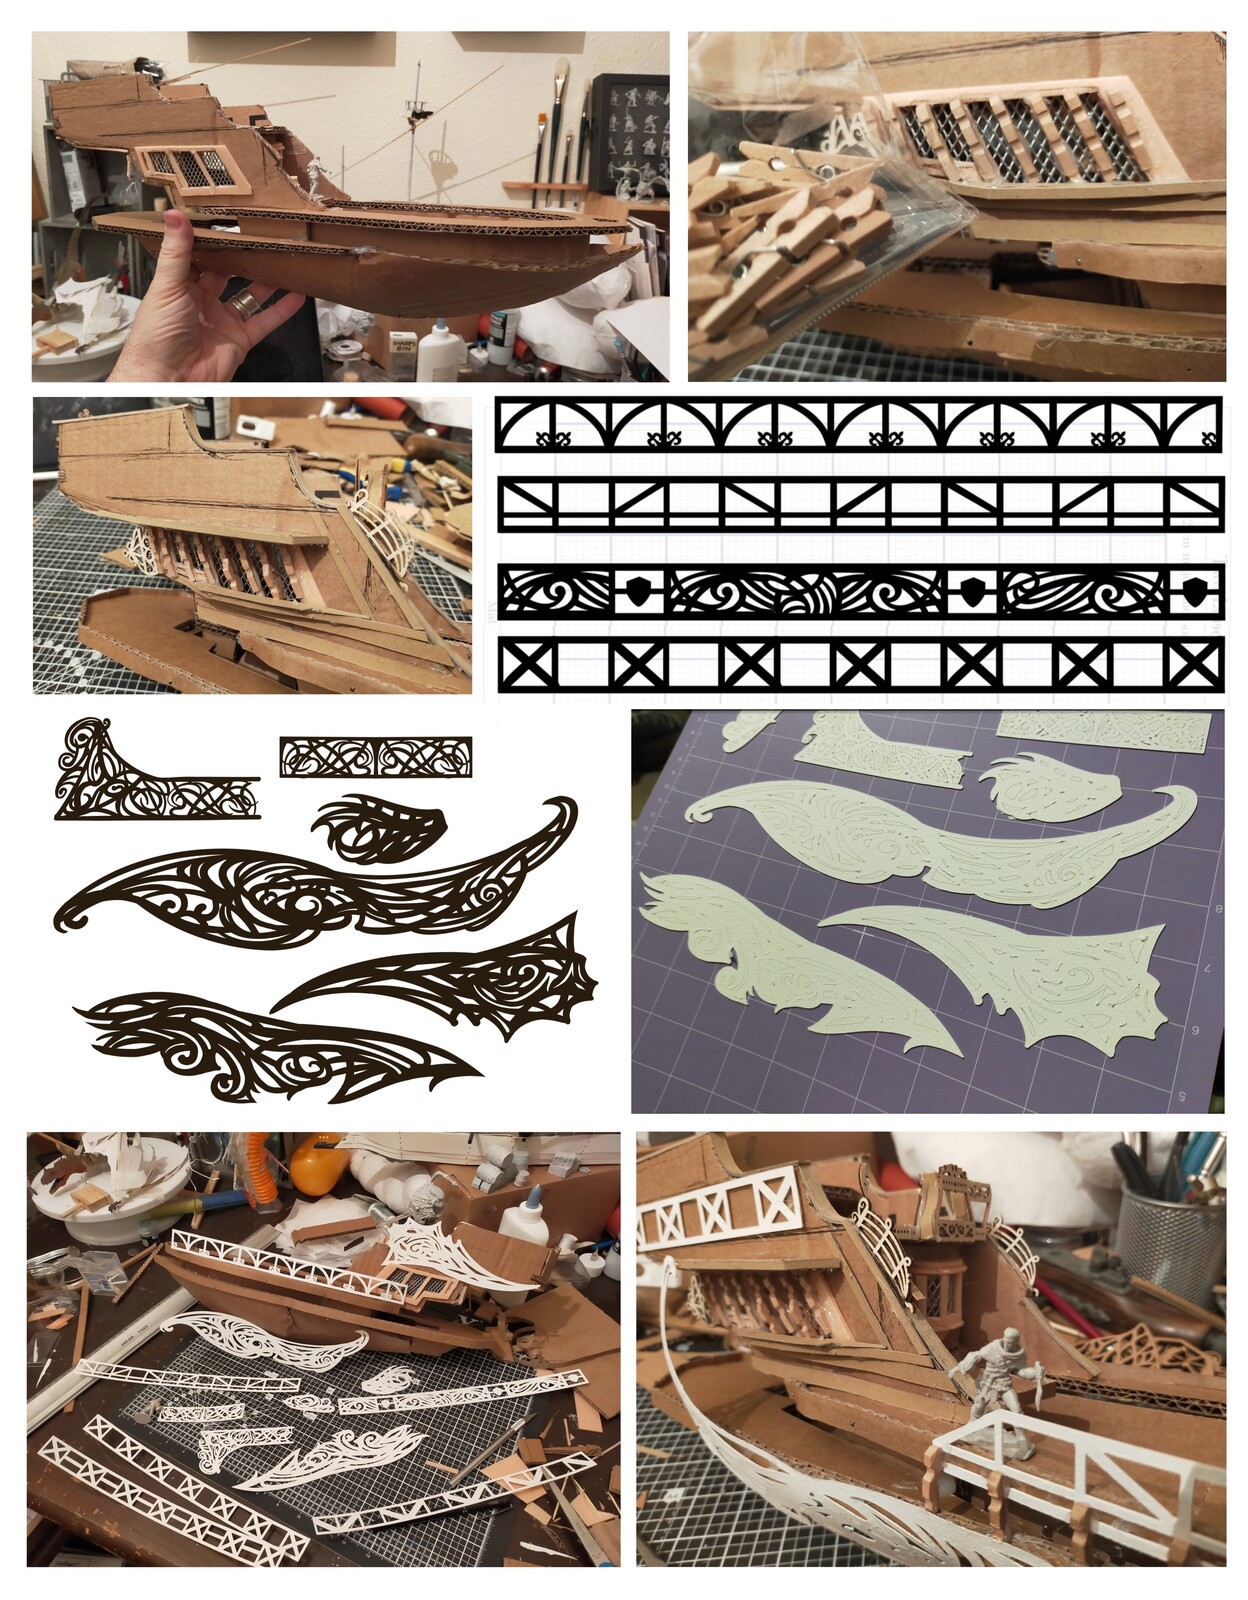 The process of creating fret-cut  paper sections to add to the ship using a cric-cut machine.